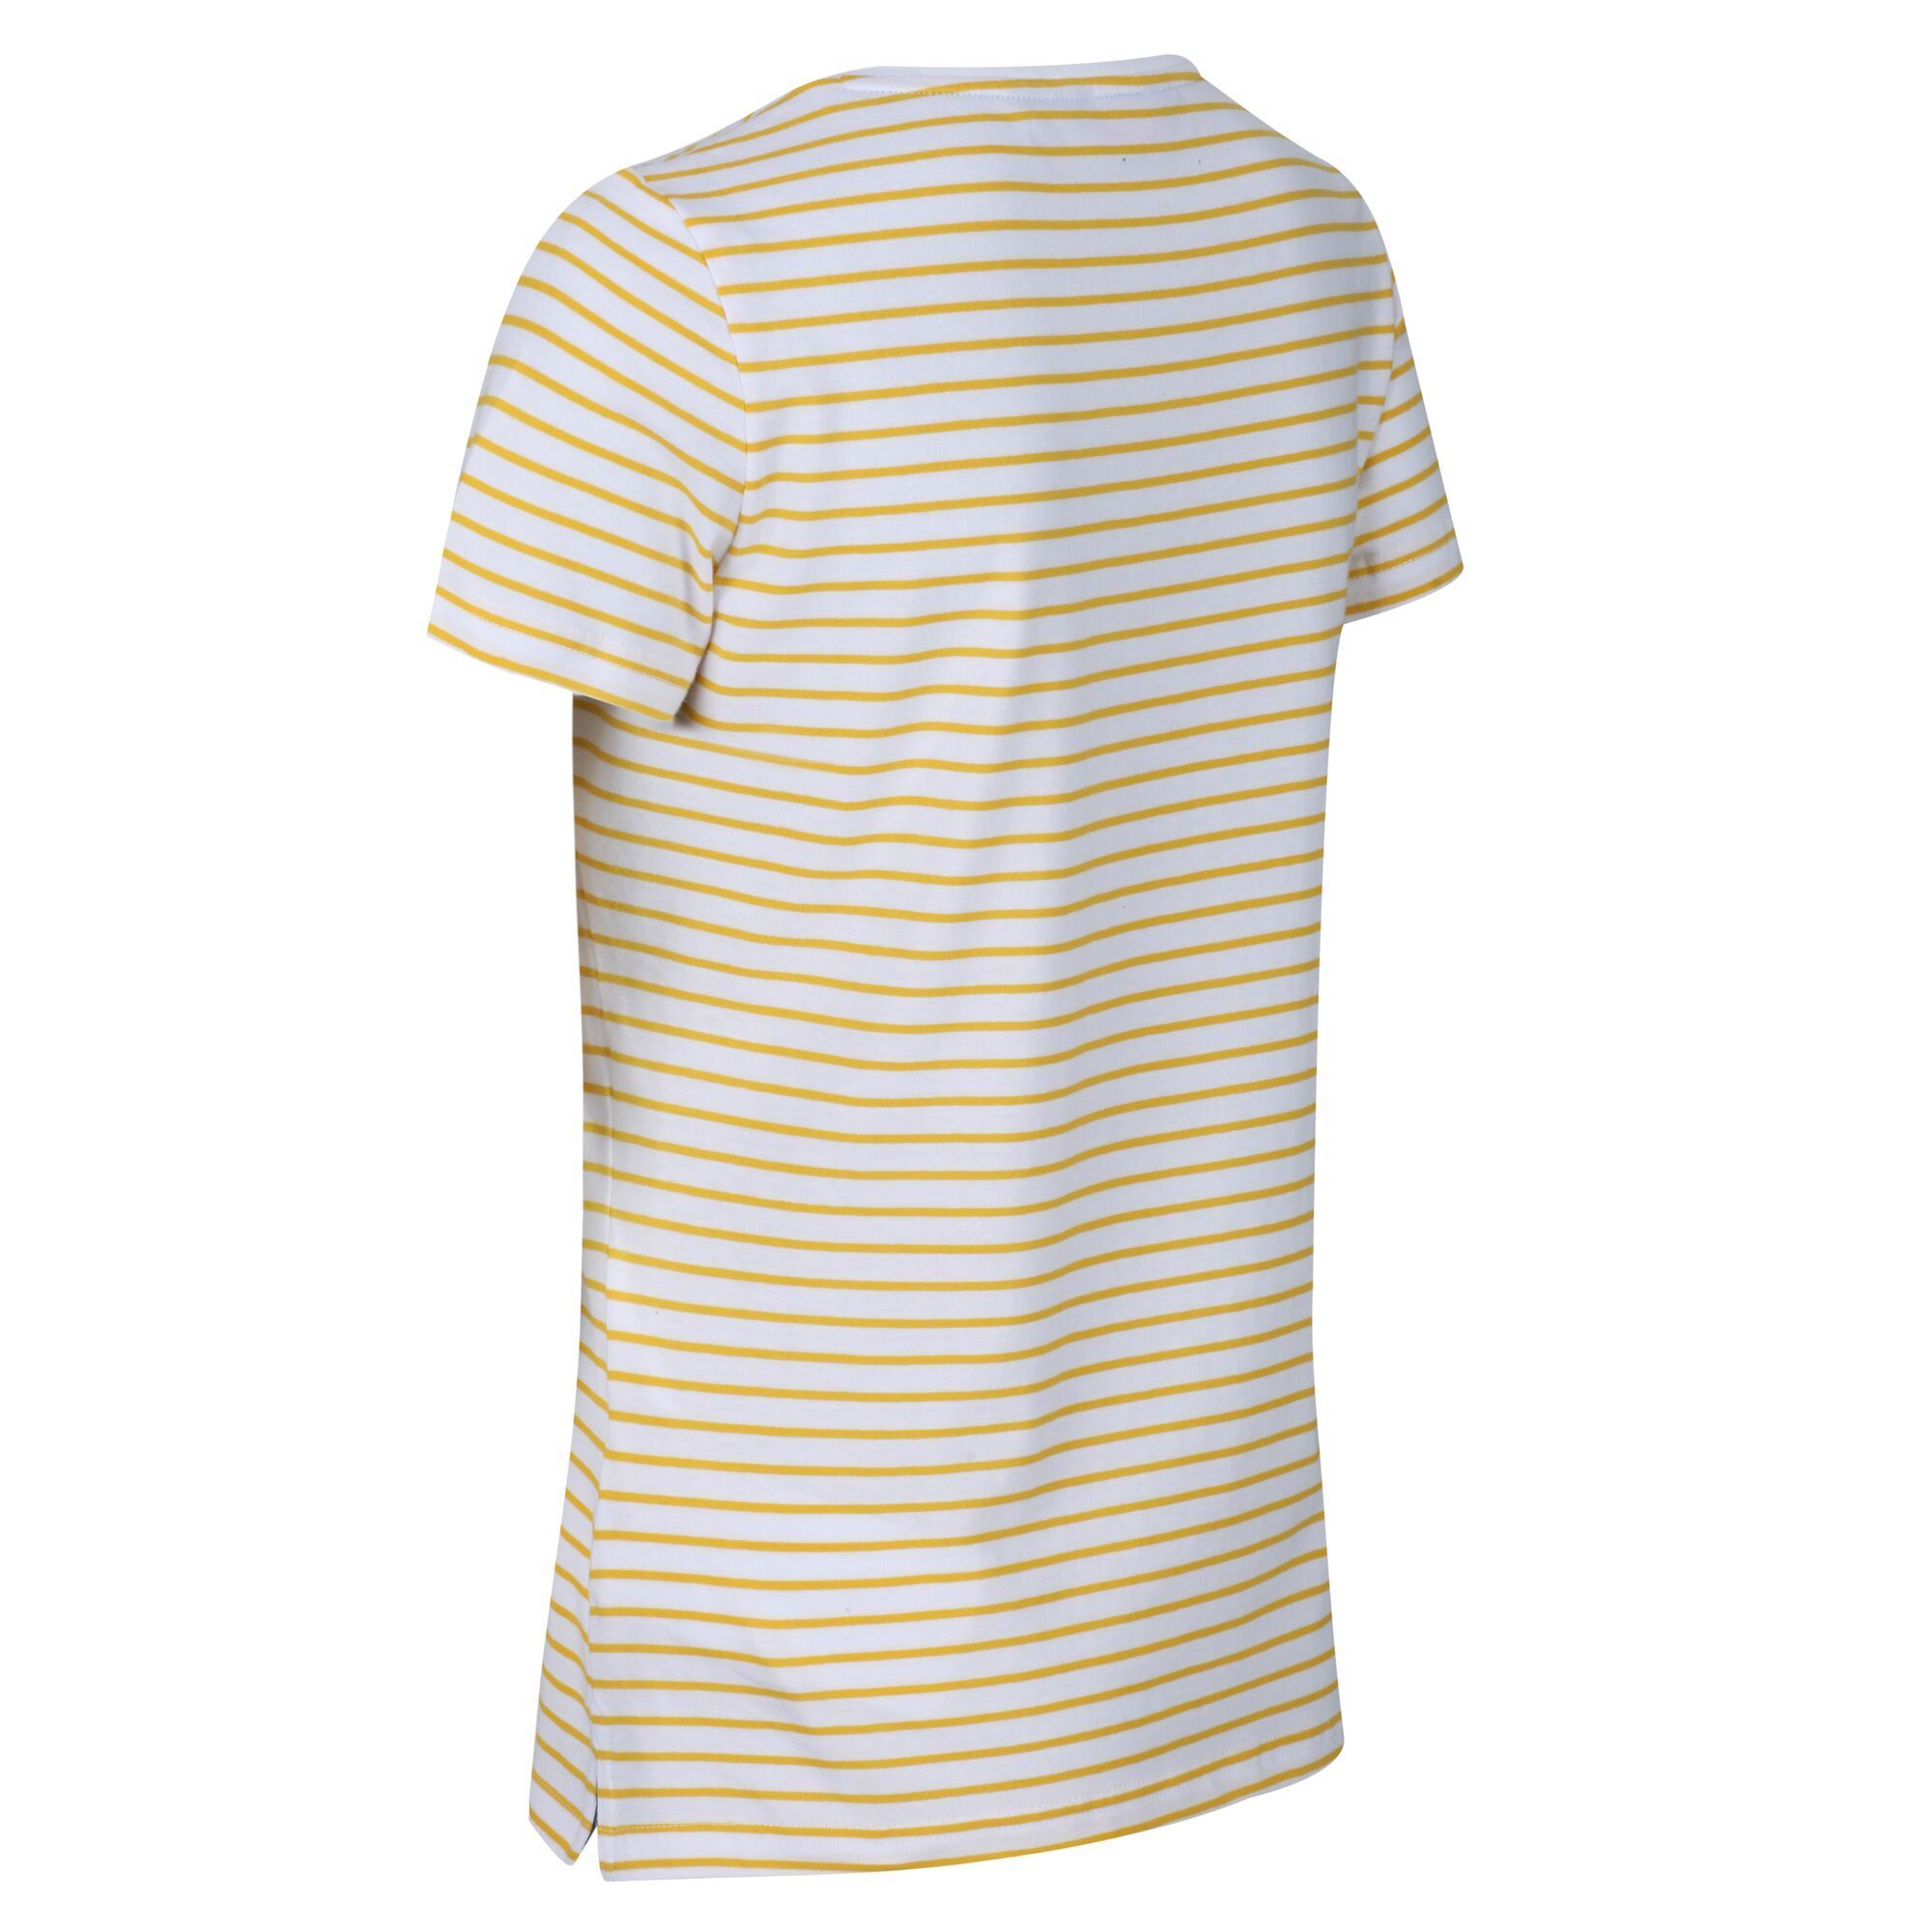 Material: 100% cotton. Stripe jersey fabric. Foil print to chest. Round neck.